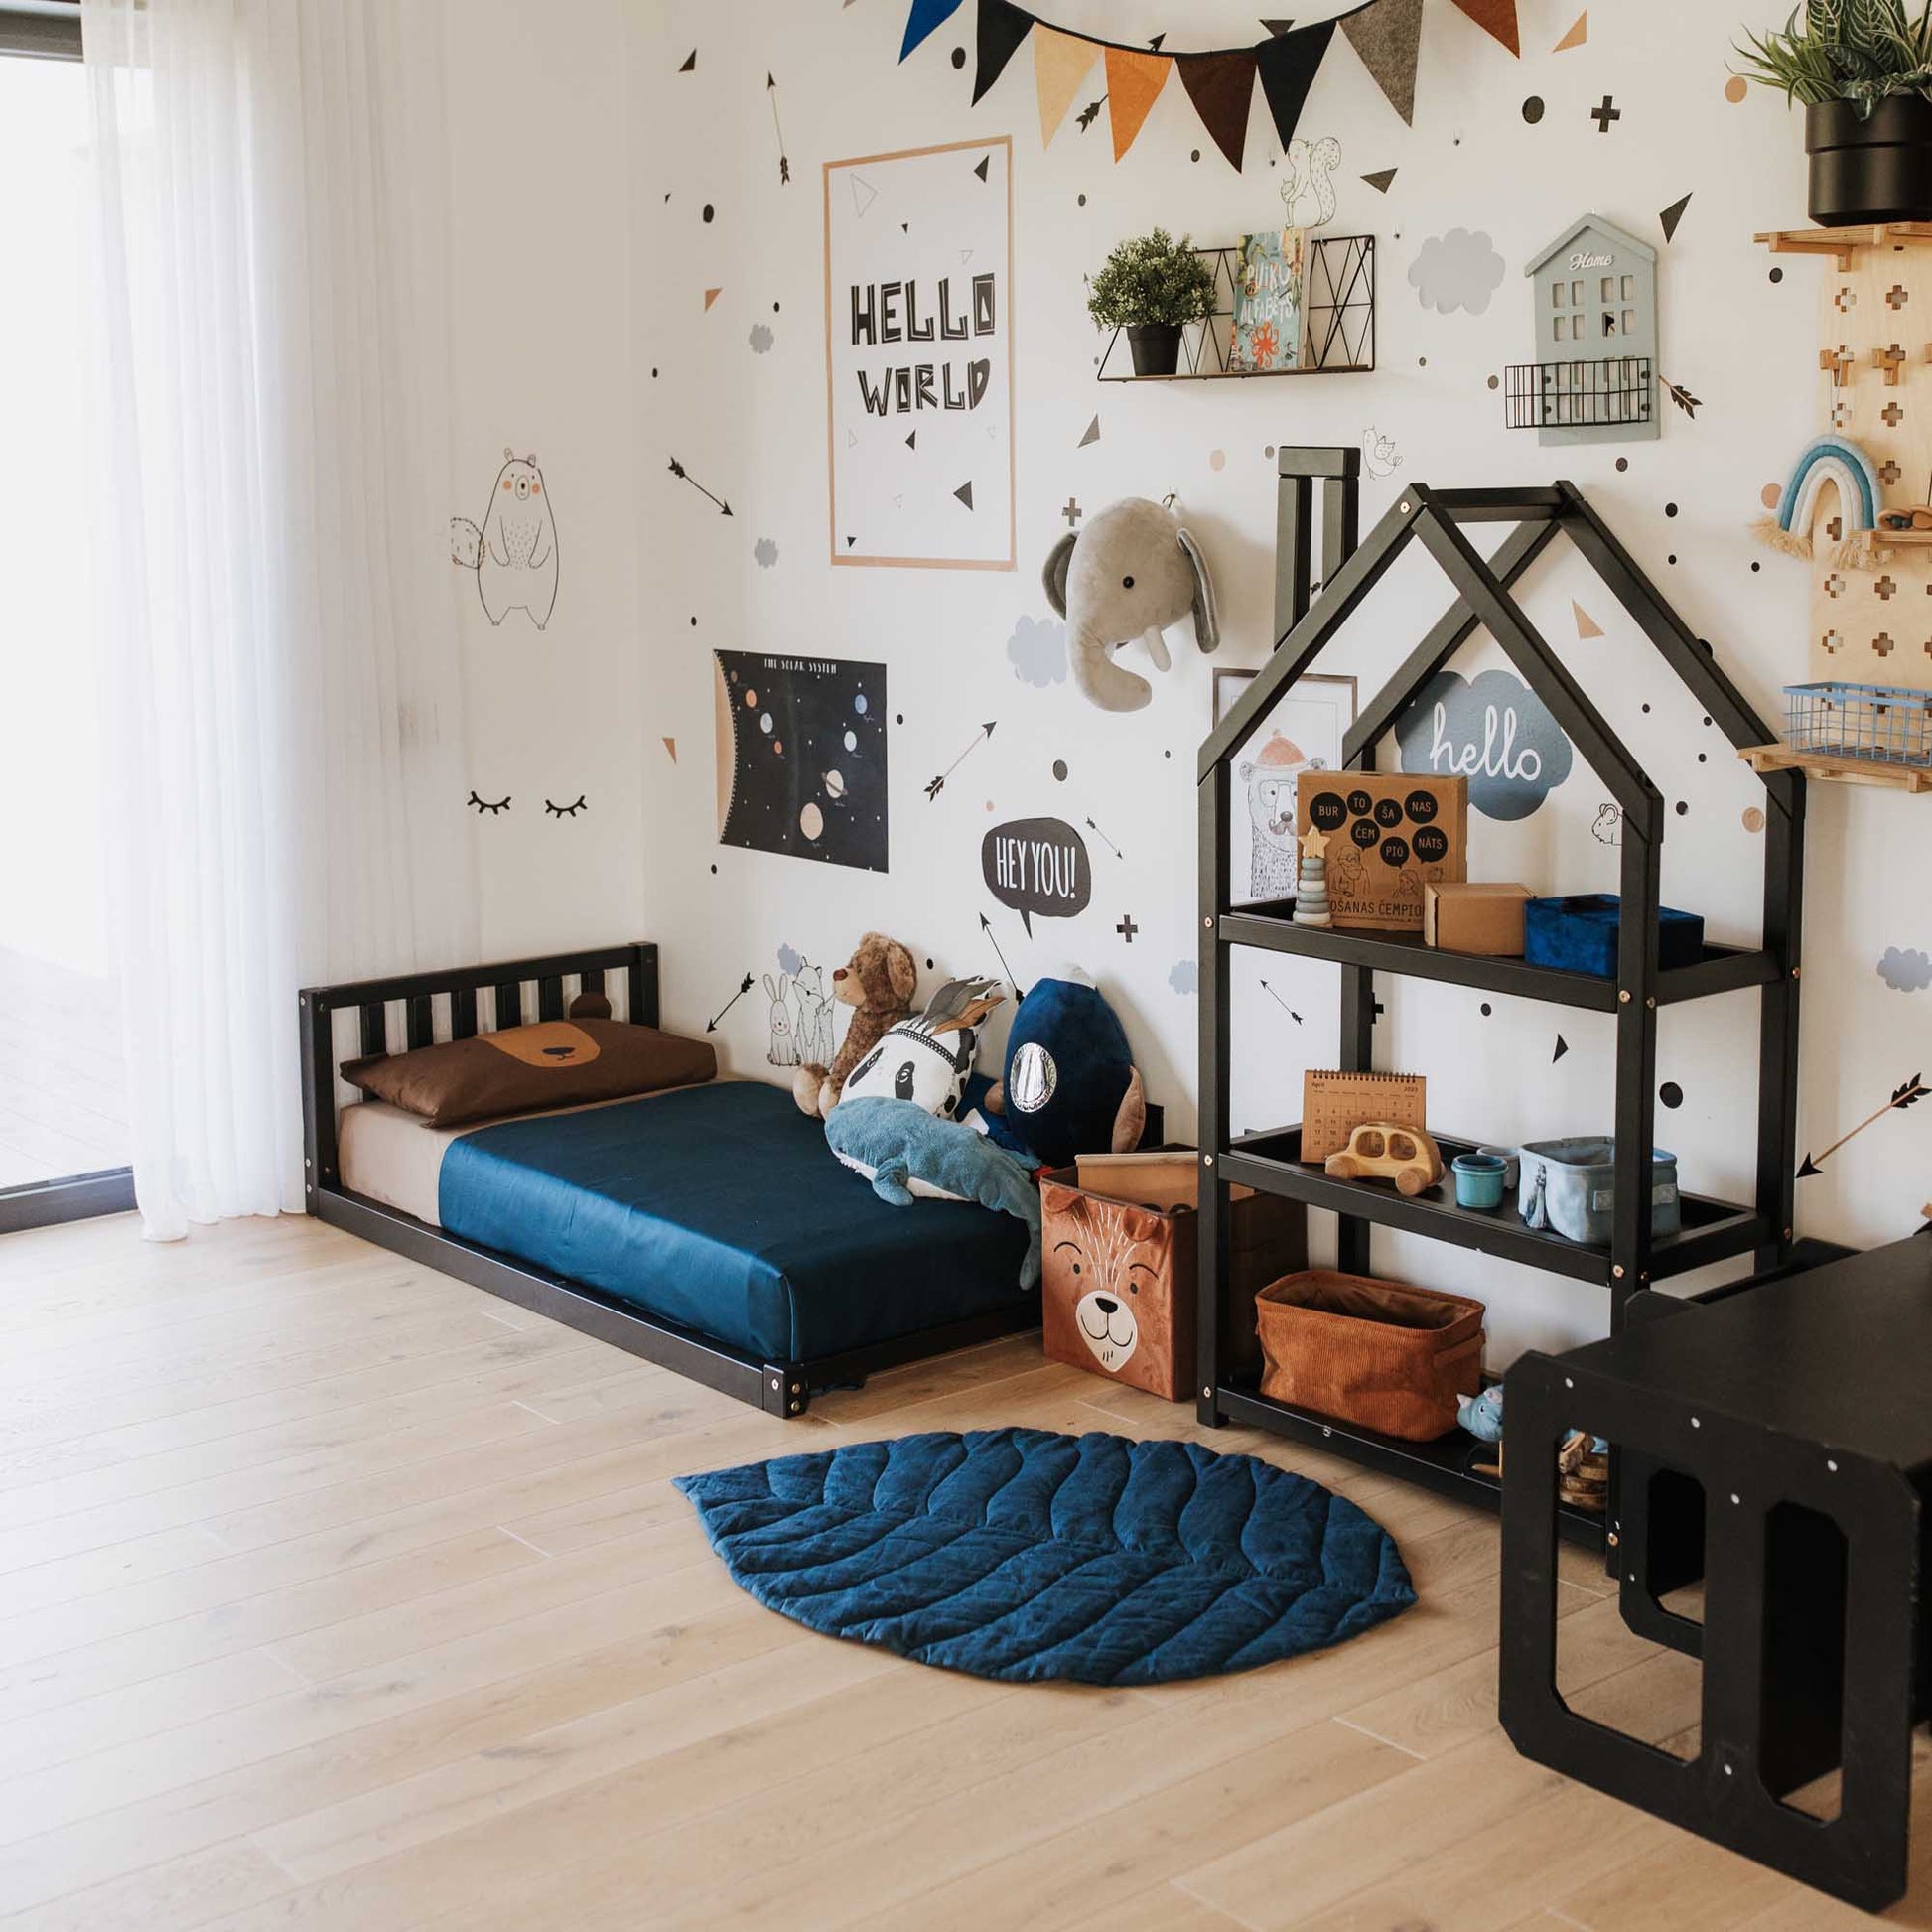 A children's room with a Sweet Home From Wood 2-in-1 toddler bed on legs with a vertical rail headboard, made of solid pine or birch wood, following a black and blue theme.